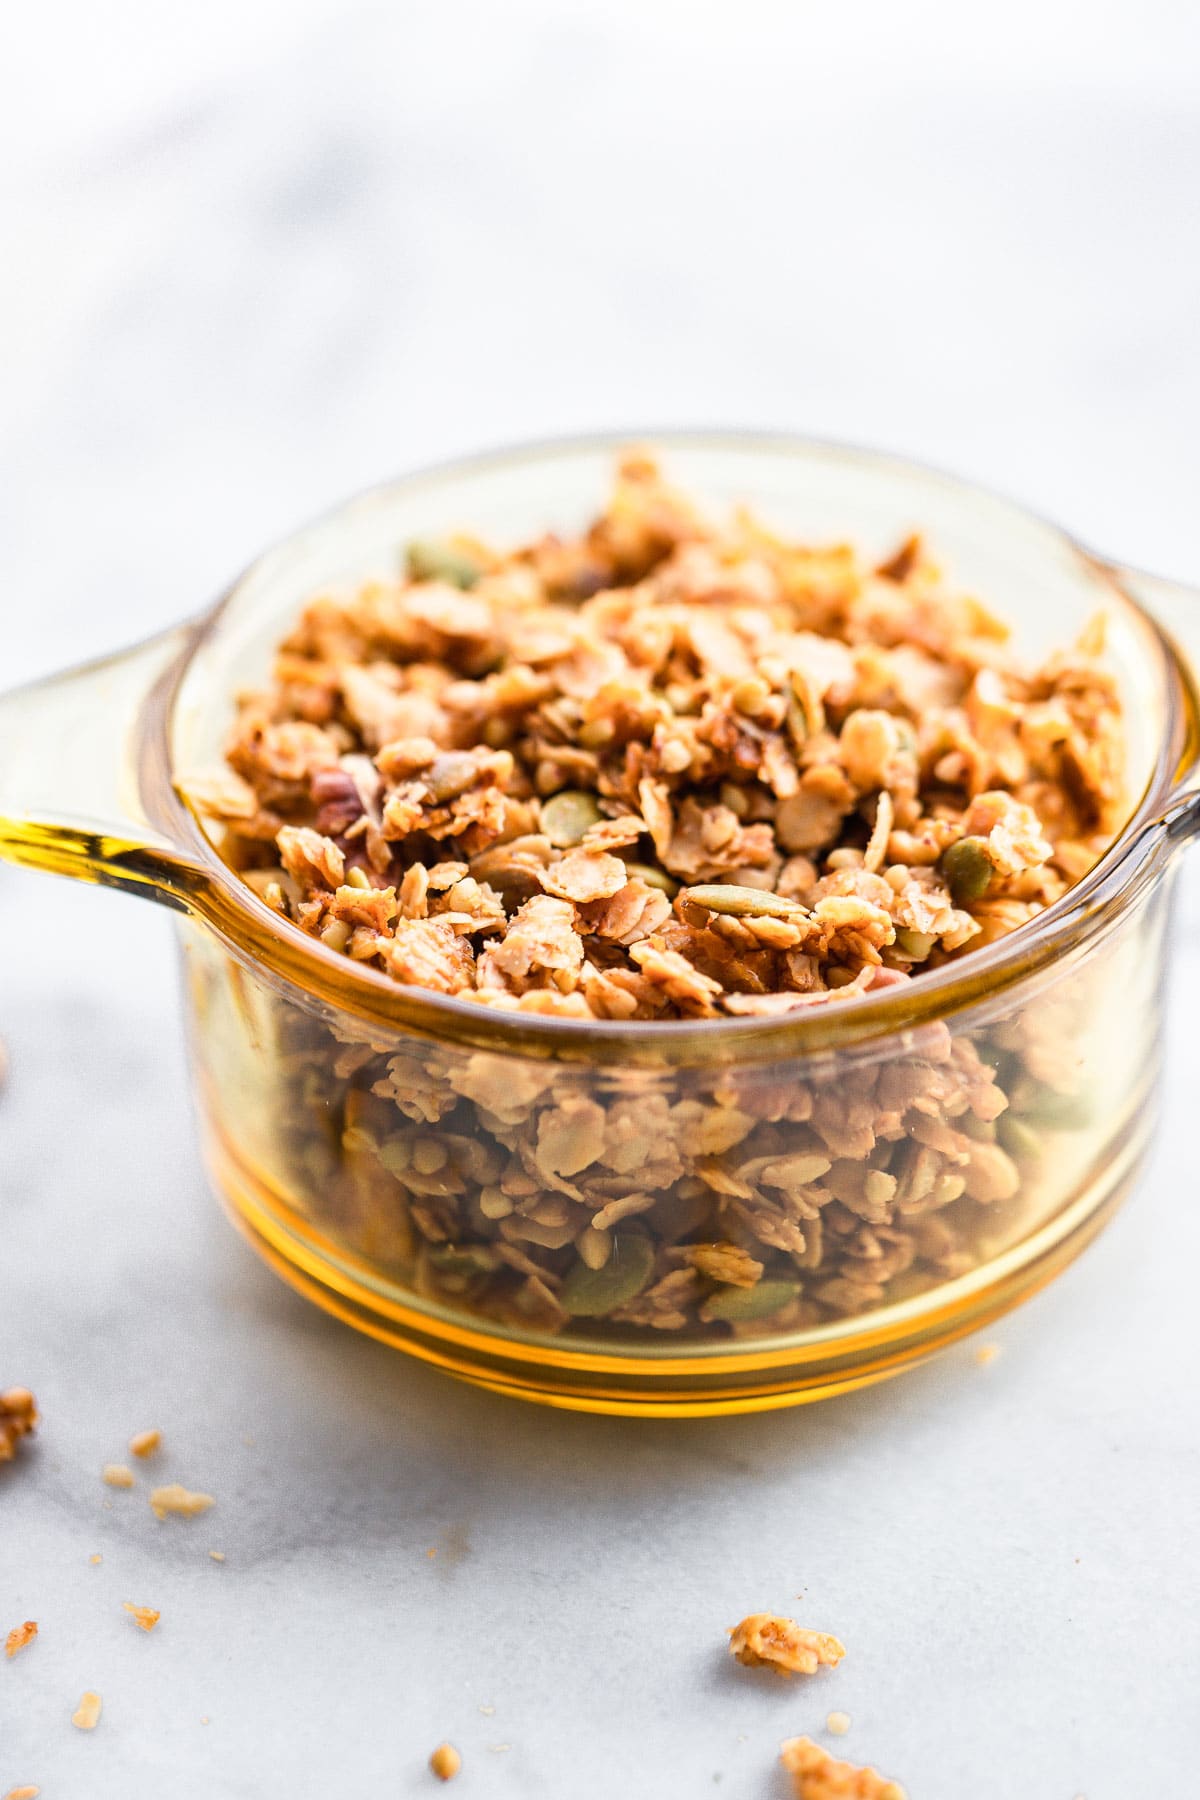 This homemade granola has buckwheat groats and is lightly sweetened with maple syrup. It's a delicious, wholesome anytime snack. Plus, it's perfect for holiday food gifts! Pair it with whatever you’d like-  yogurt, milk, dried fruit, chocolate, etc. Or, eat it by itself! This granola recipe is vegan and refined sugar free. #granola #glutenfree #vegan #homemade